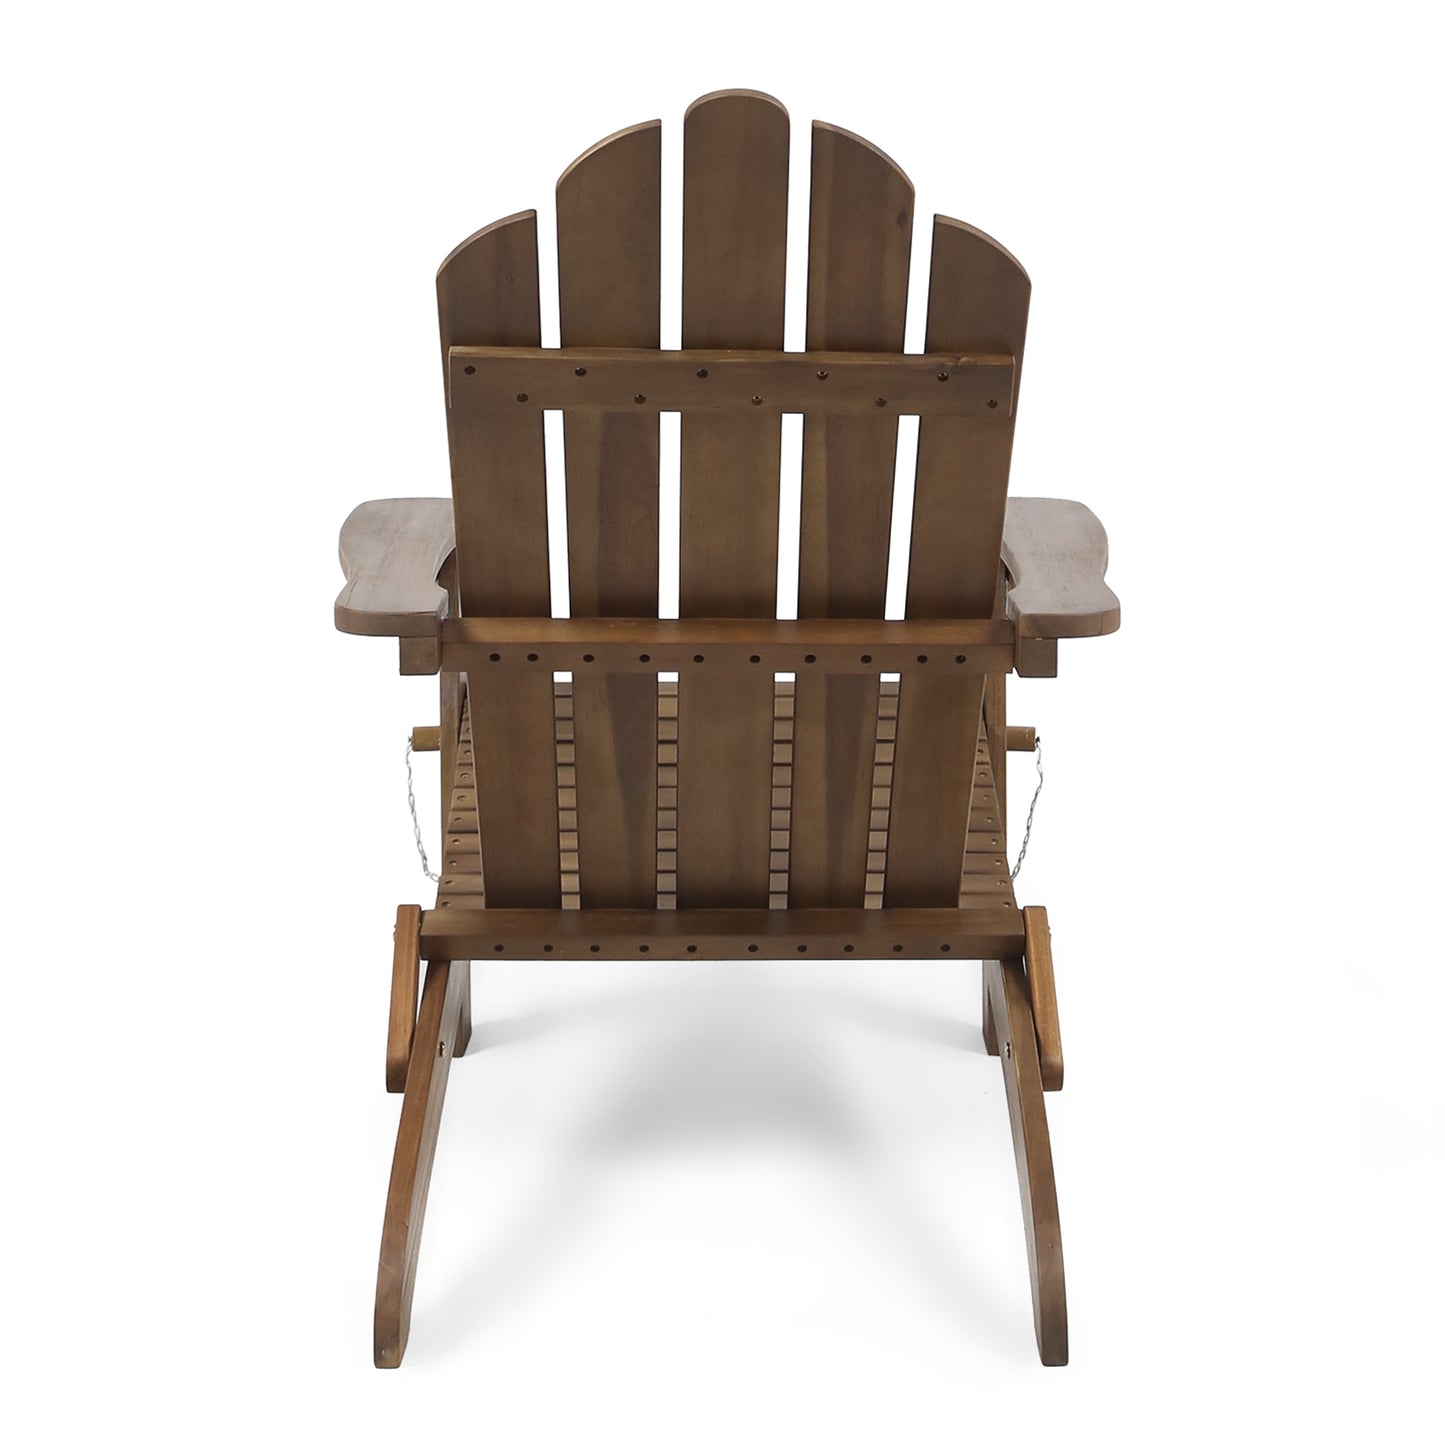 Hollywood outdoor foldable solid wood ADIRONDACK  Dark Brown chair